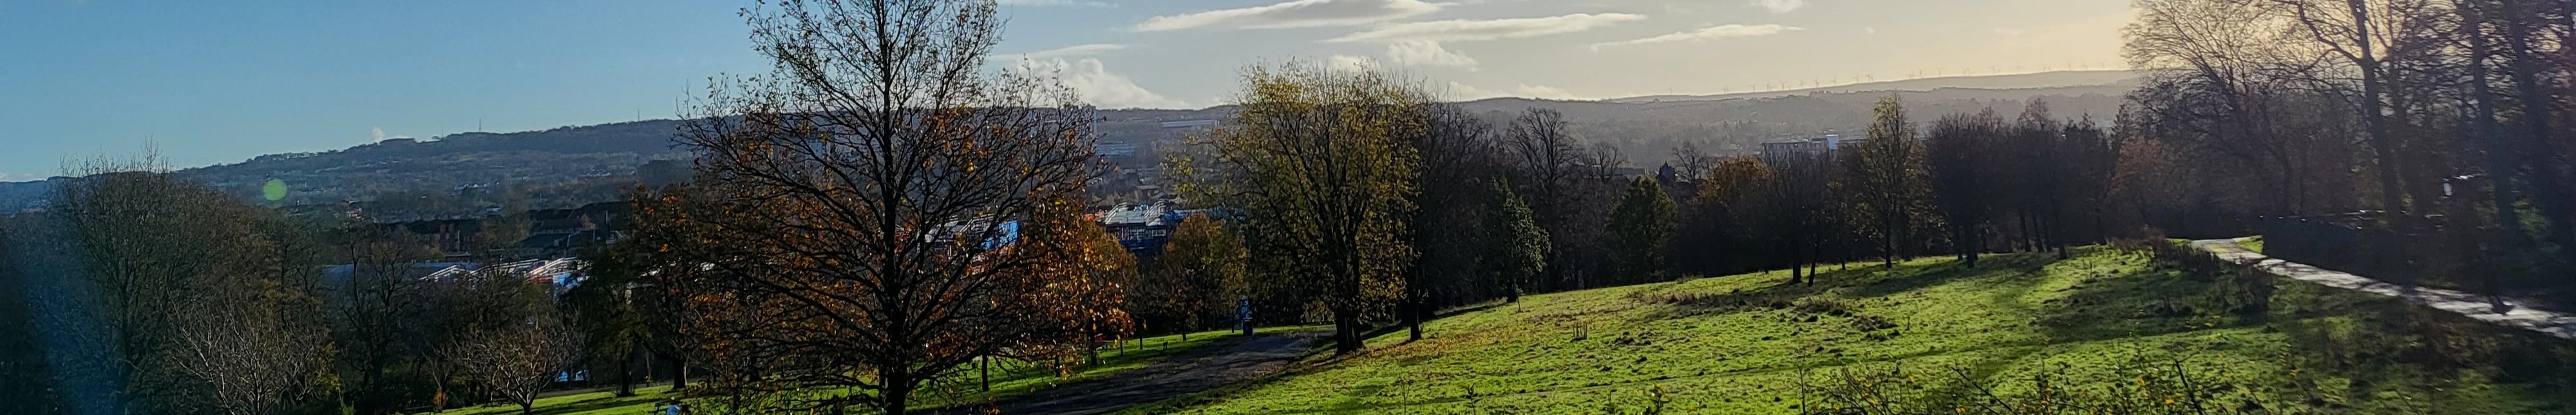 Thin banner showing a grassy field full of trees turning orange for autumn. There are mountains in the distance, a blue sky with light clouds, and a city scape just visible through the trees.